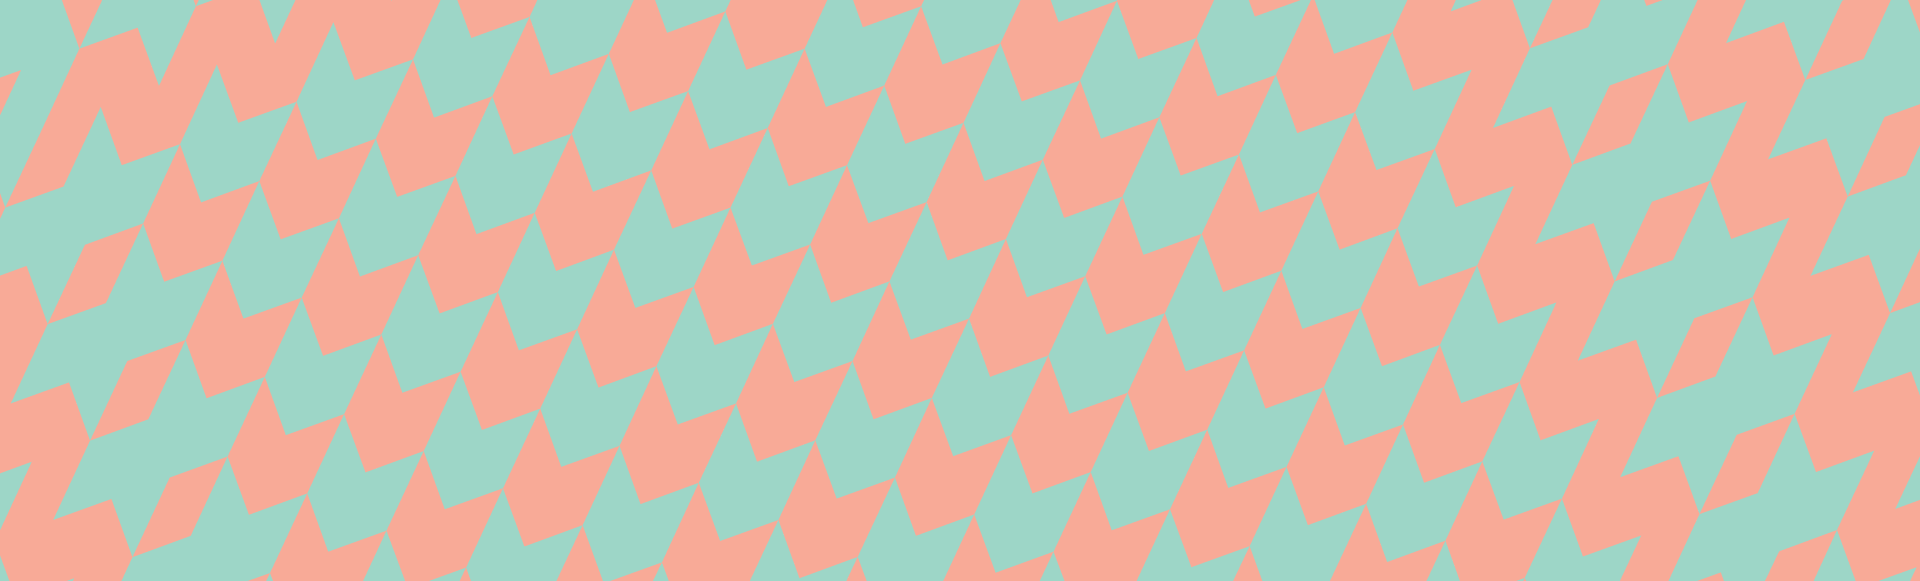 Blue and pink arrow patterns